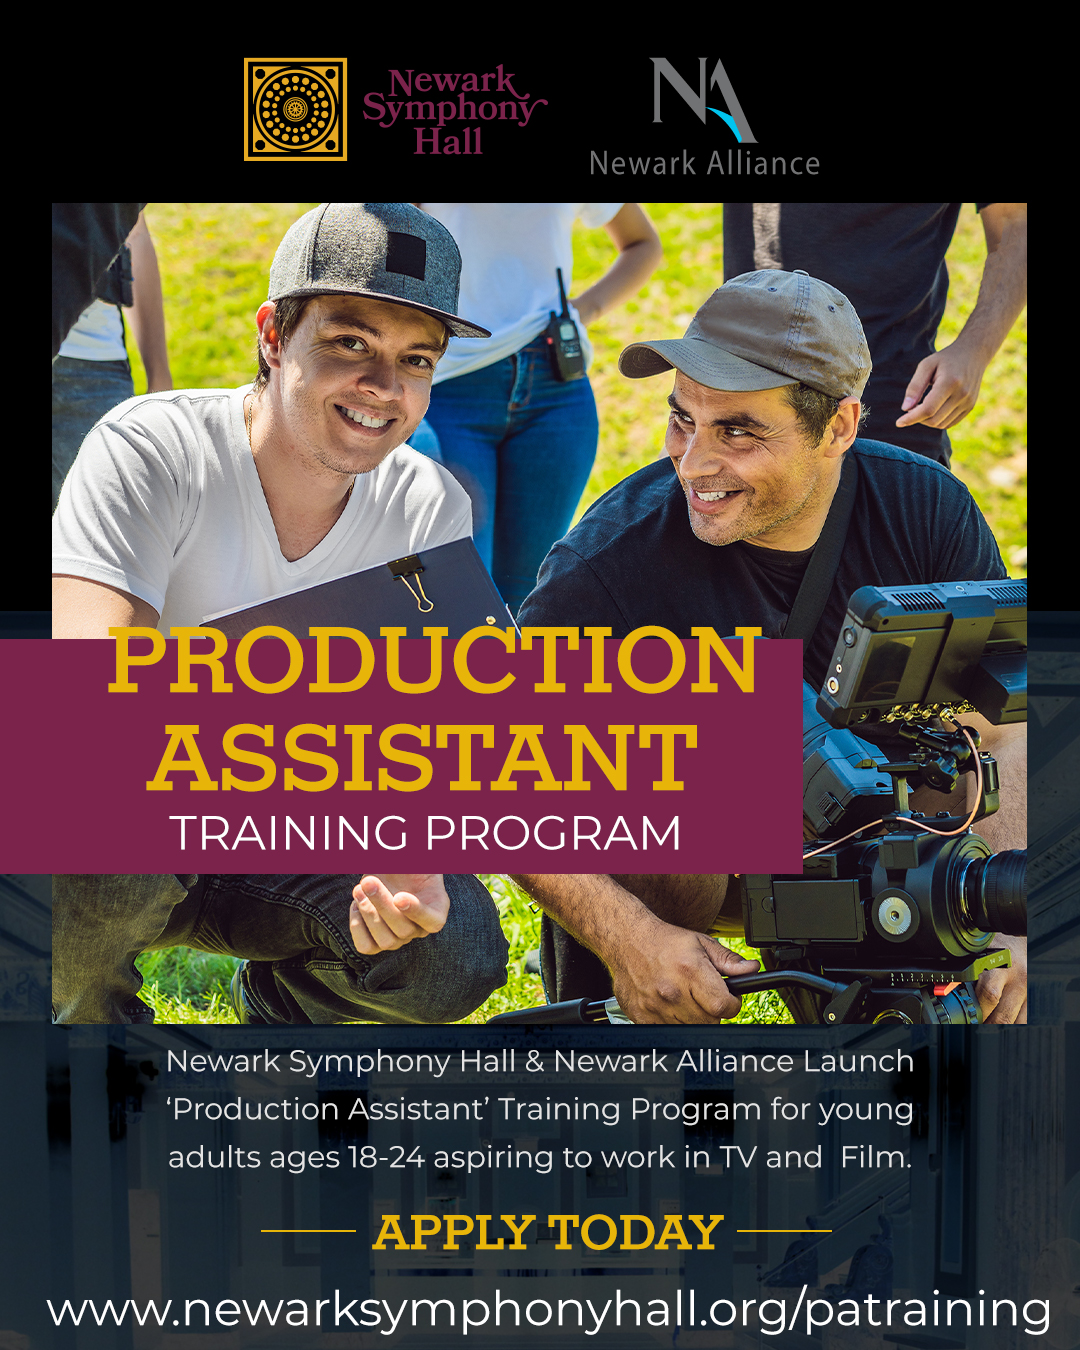 Newark Symphony Hall & Newark Alliance's launch of the "Production Assistant" training program will be open to young adults ages 18-24. (Courtesy of NSH).